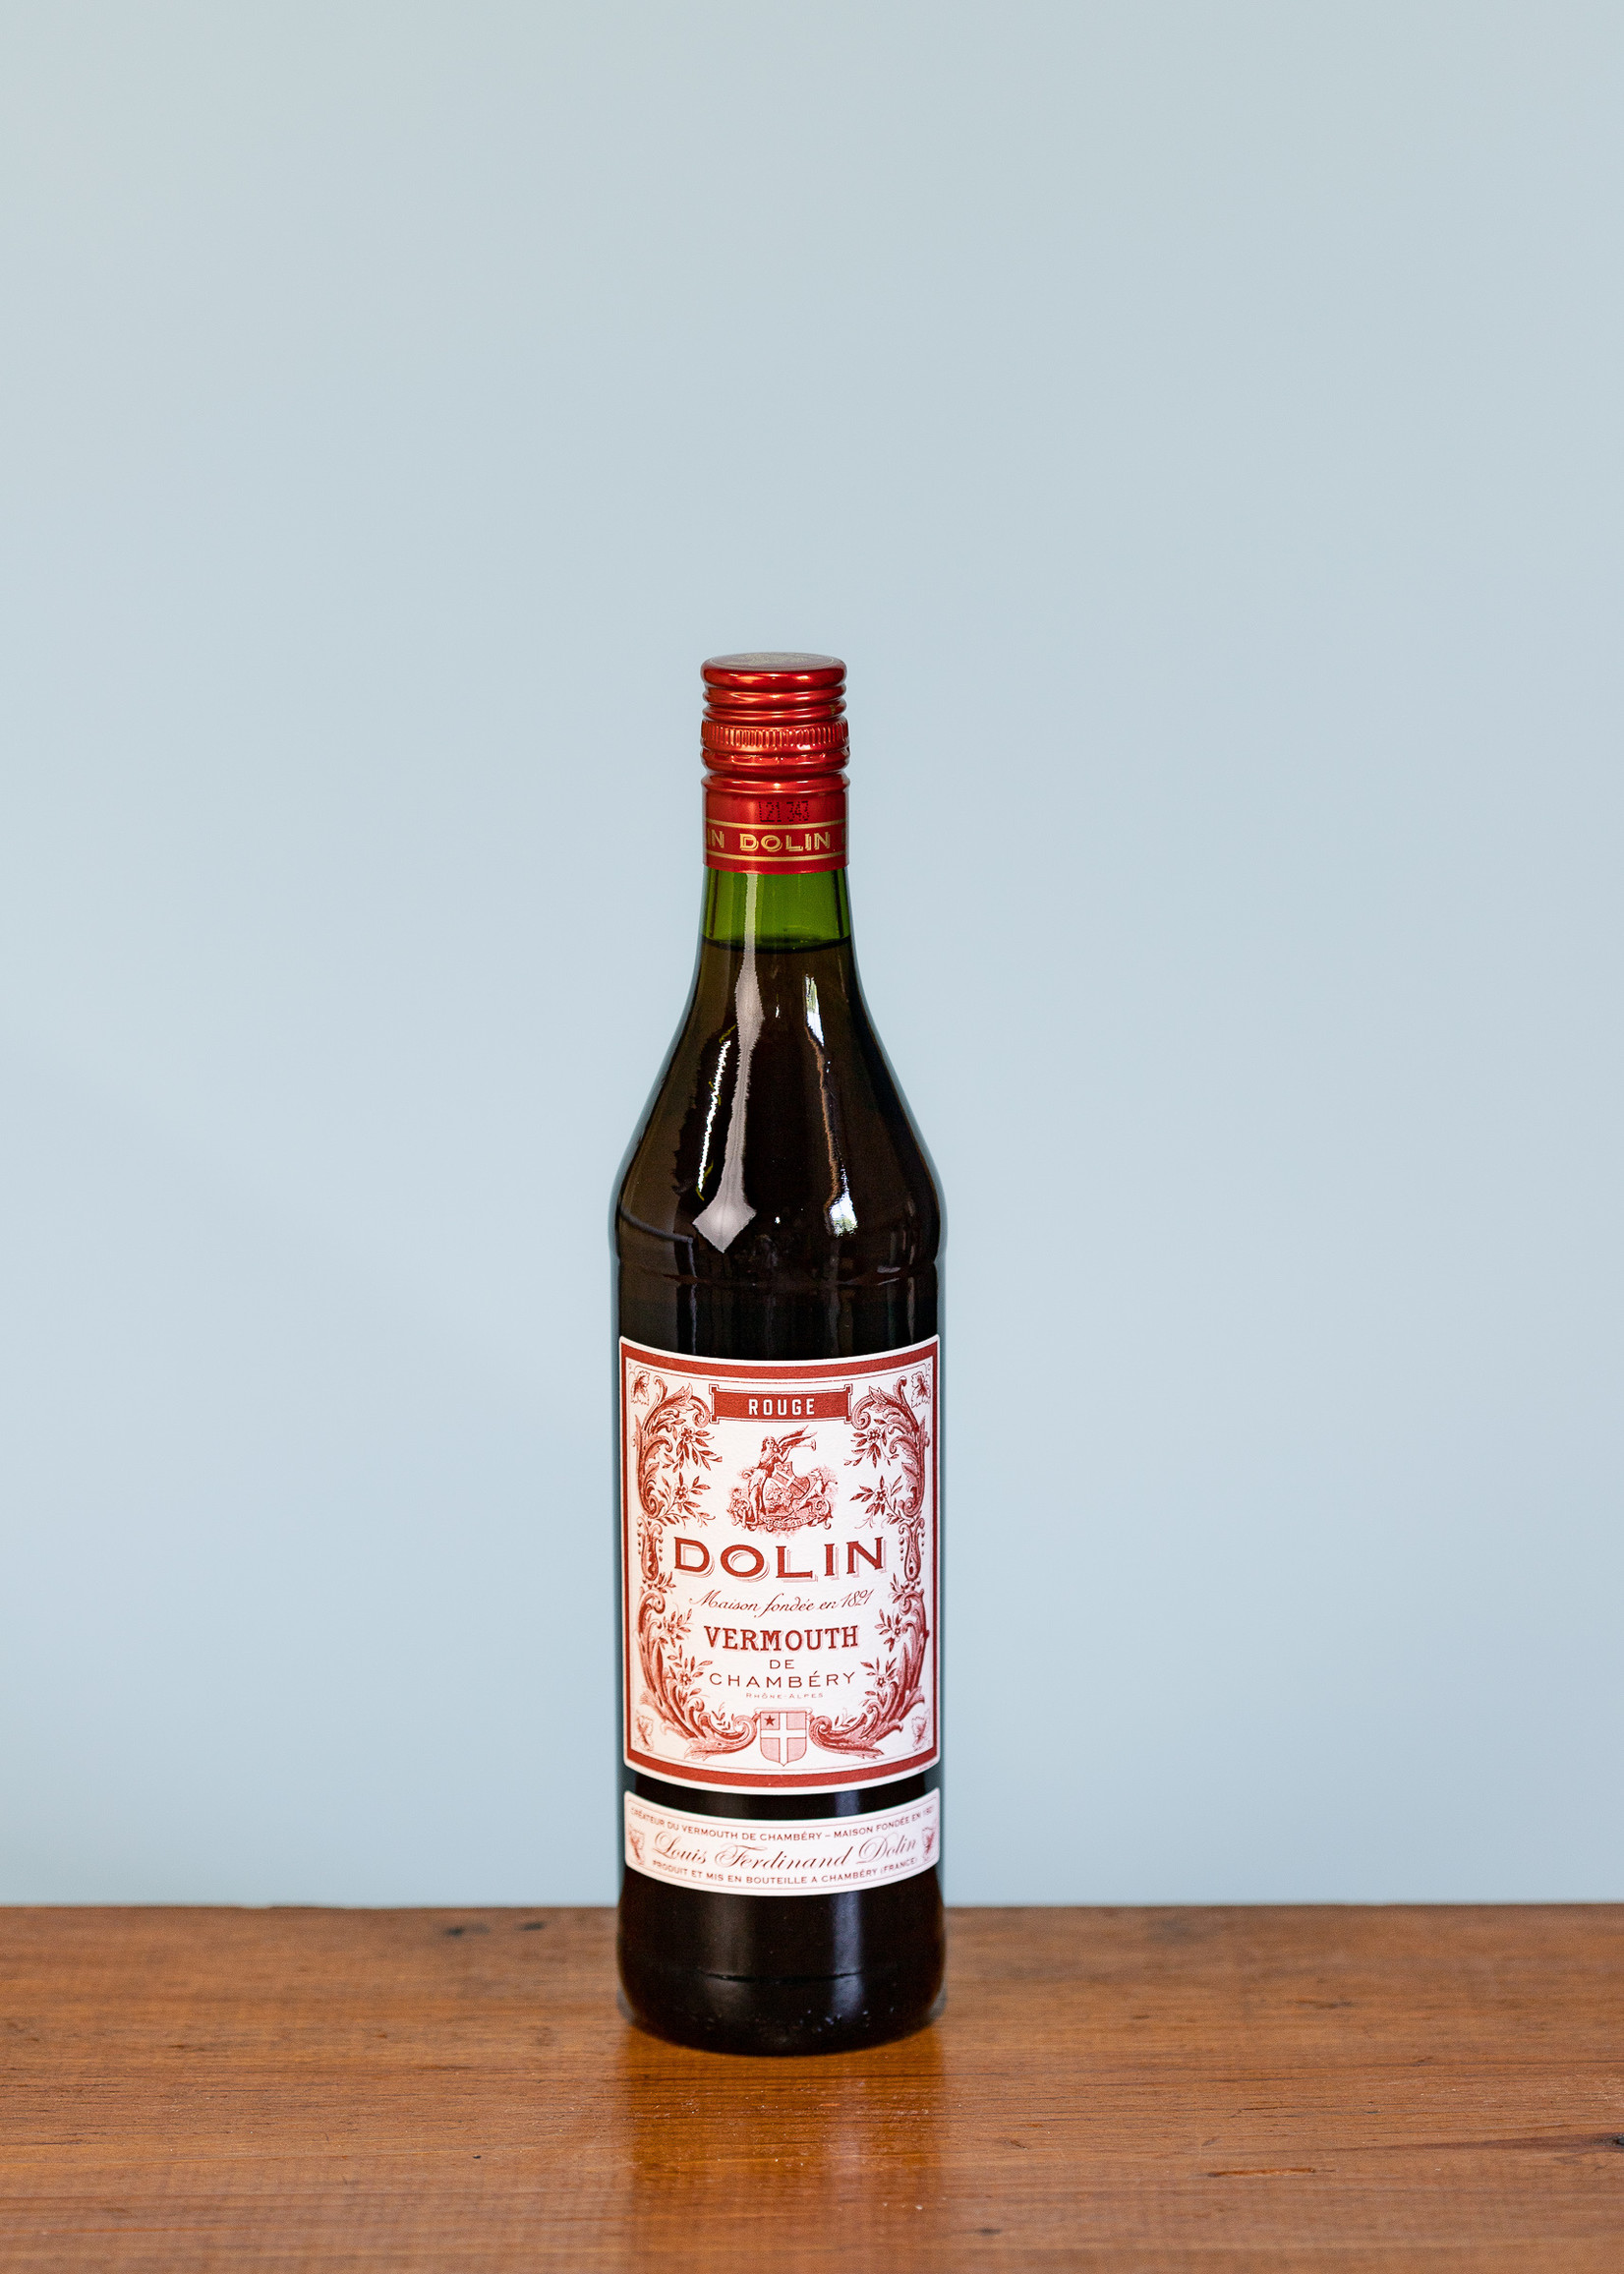 Dolin Vermouth Rouge 750ml